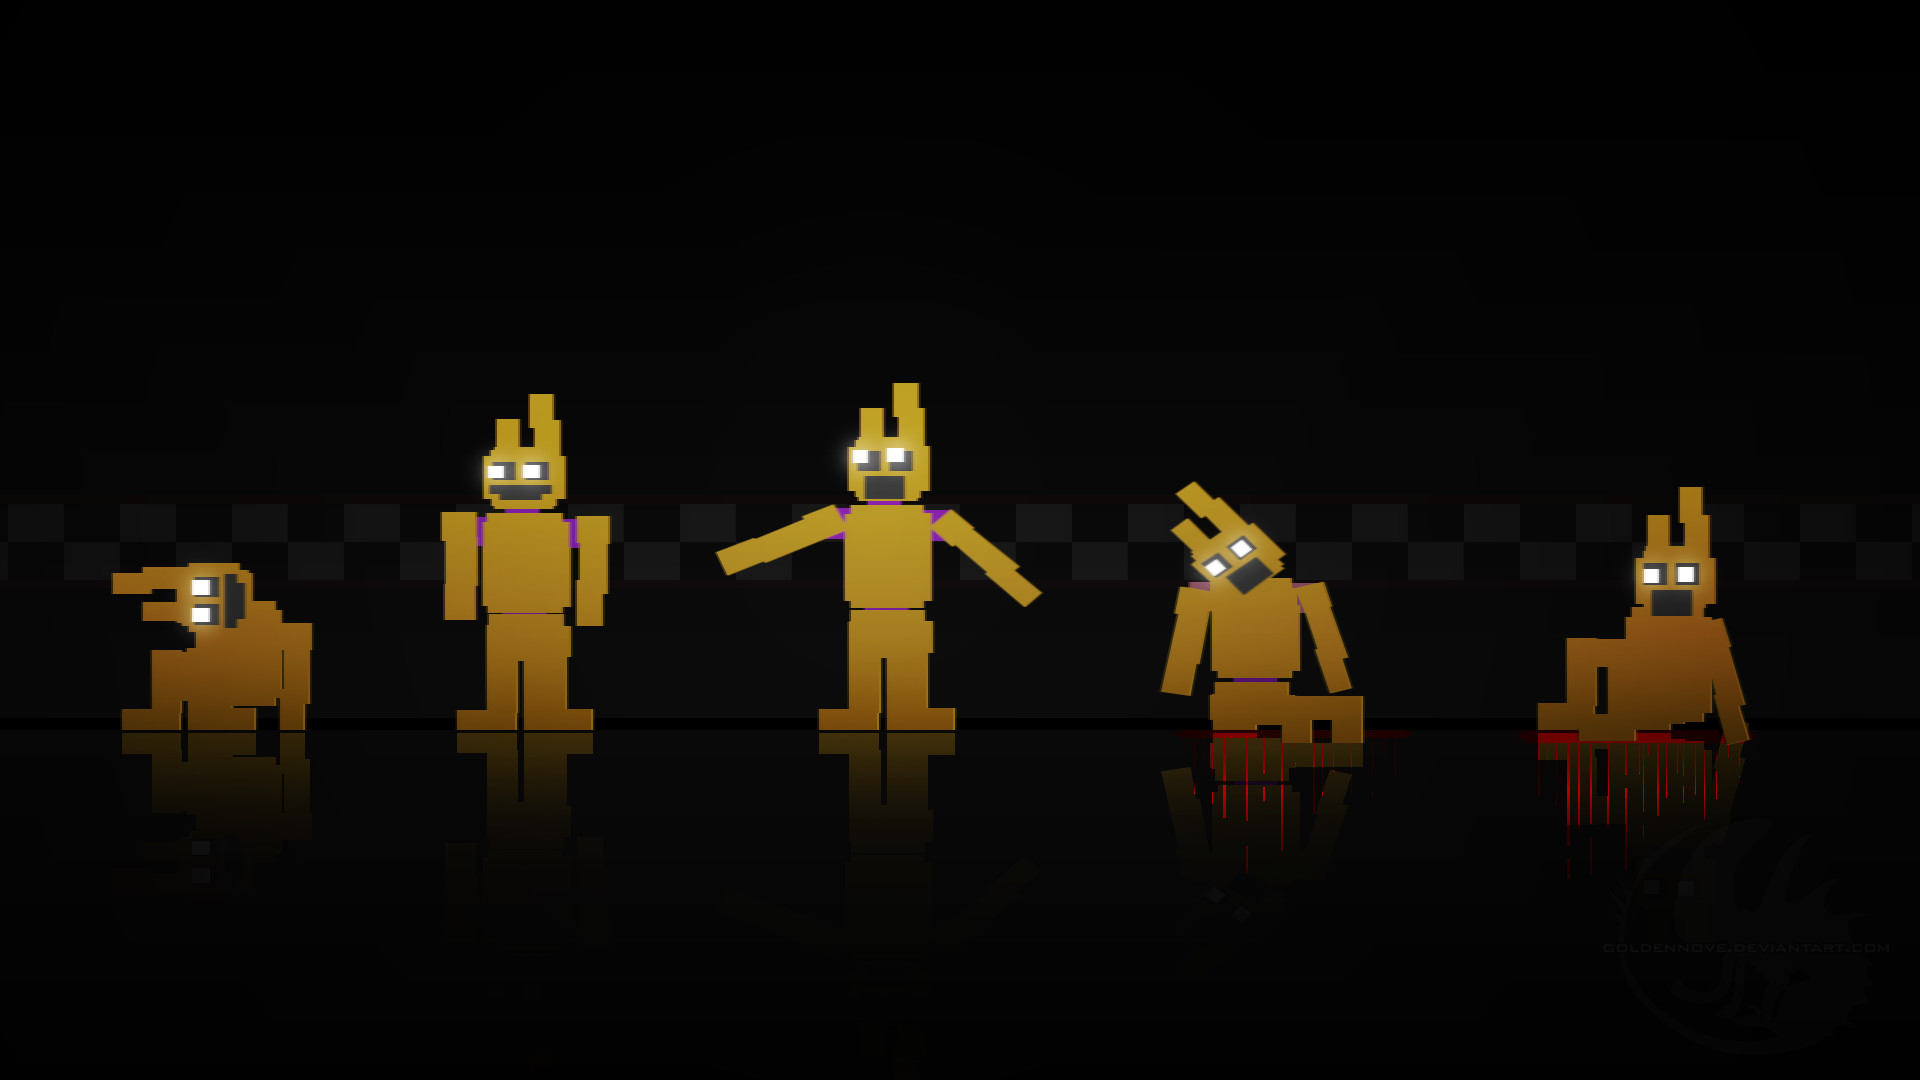 1920x1080 ... Five Nights at Freddy's 3 - wallpaper by GoldenNove